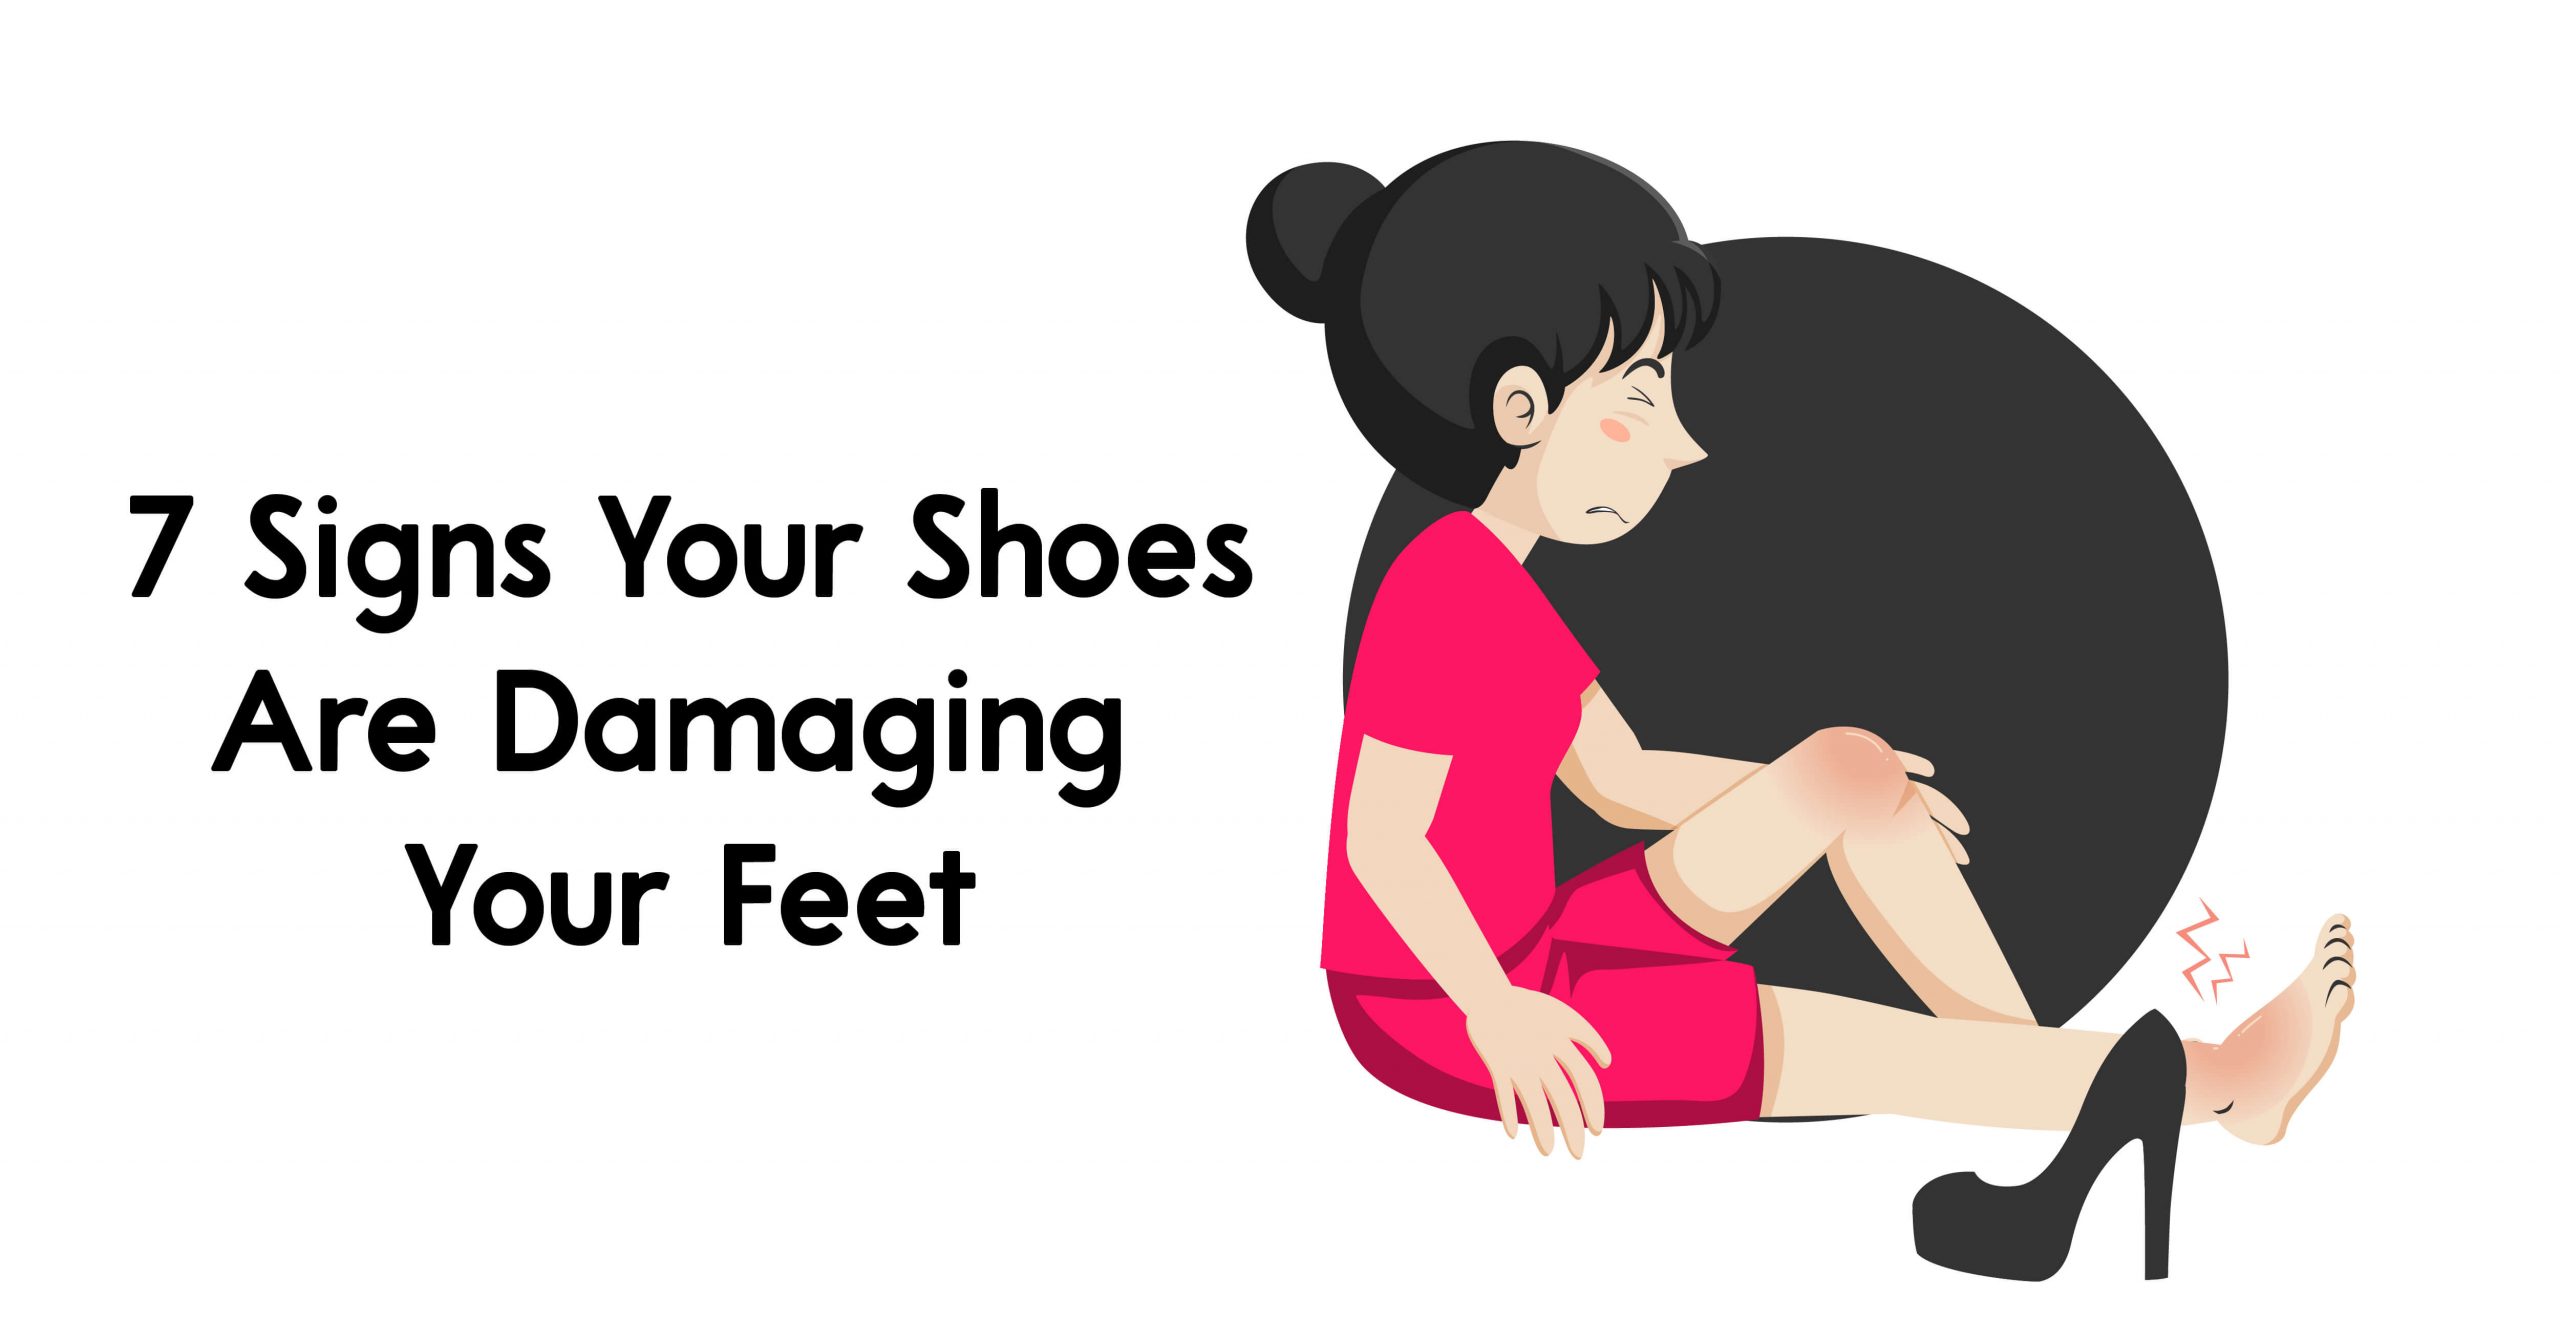 7 Signs Your Shoes Are Damaging Your Feet